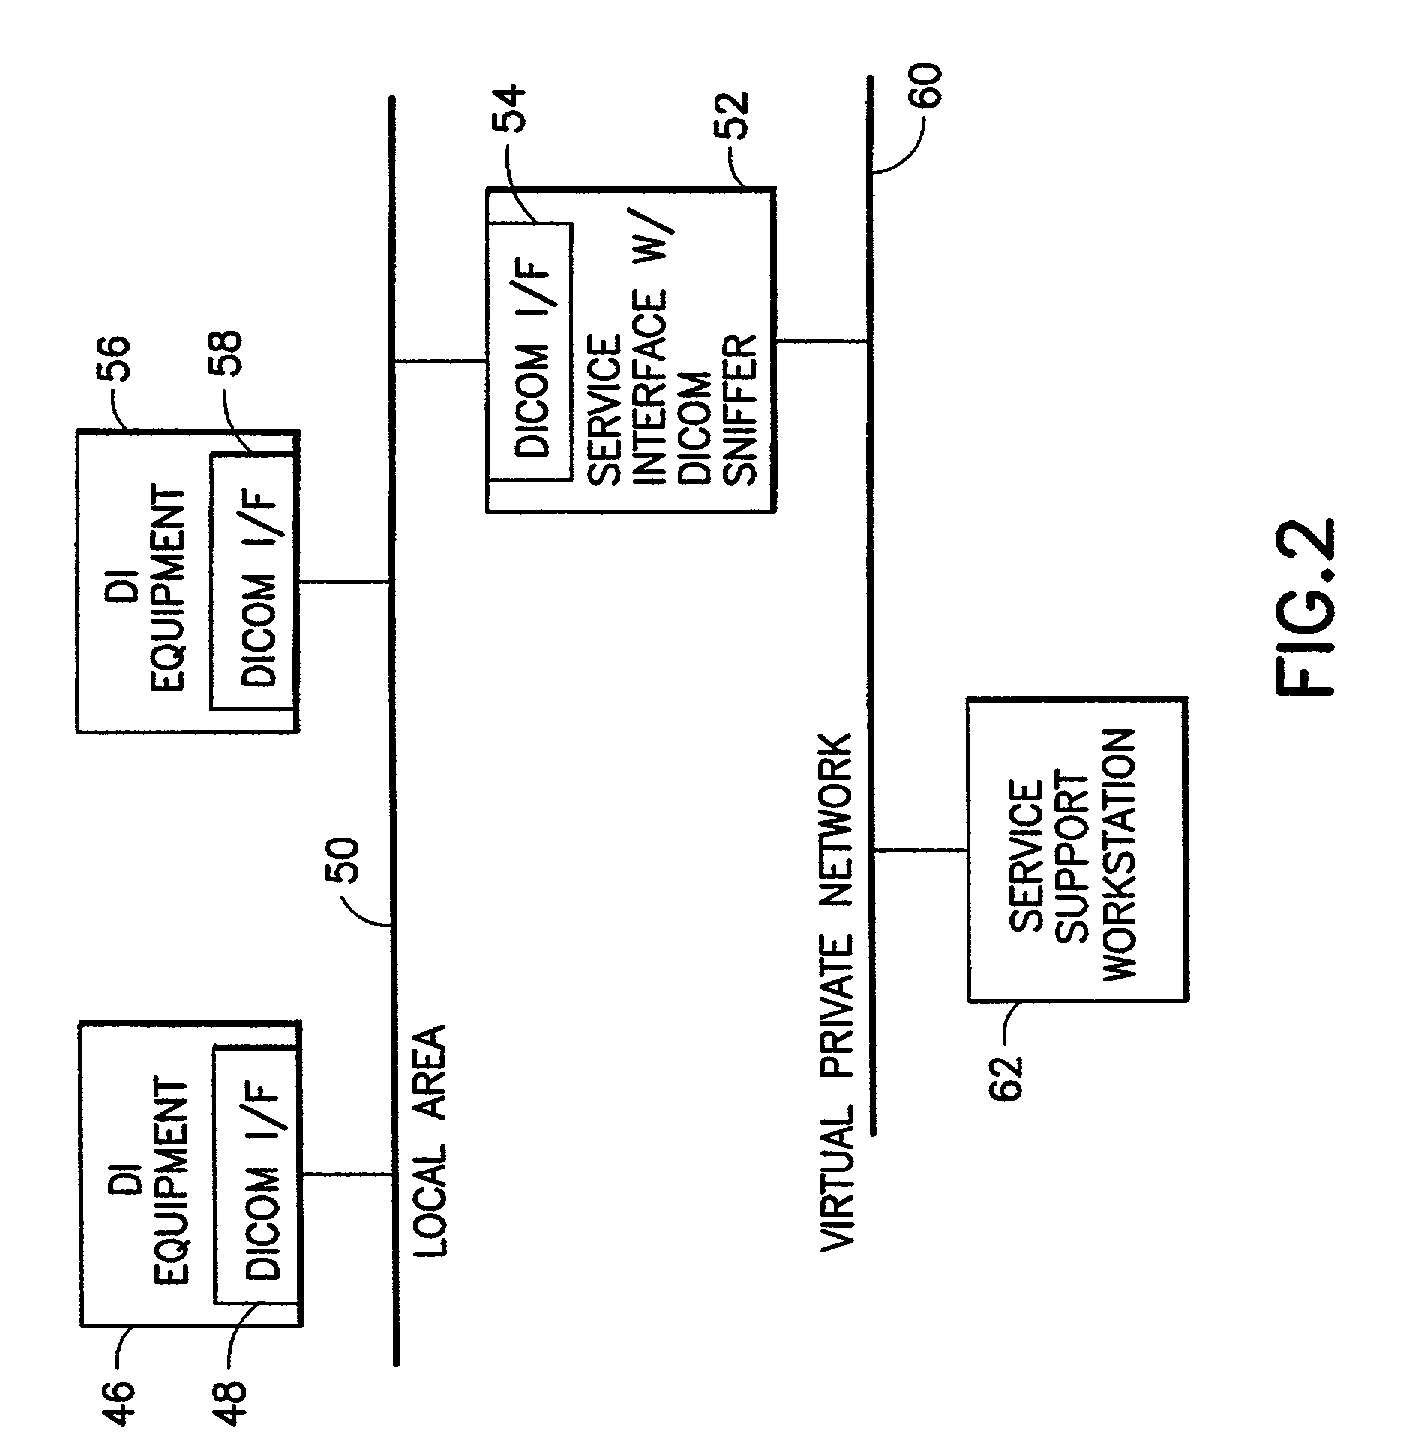 System and method for universal remote access and display of diagnostic images for service delivery